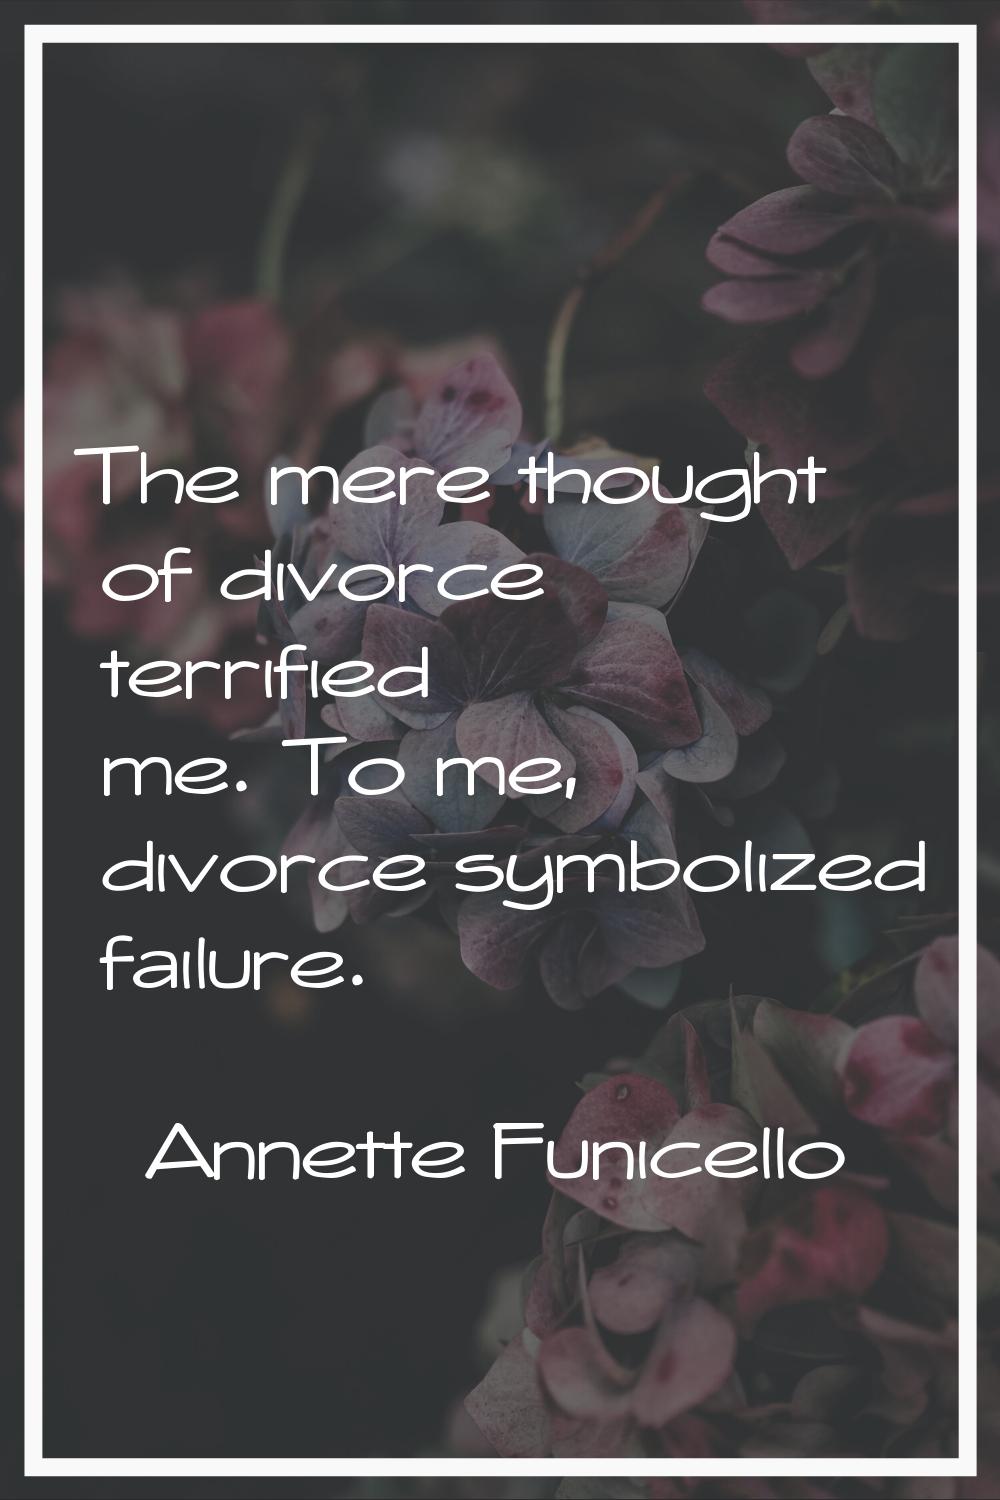 The mere thought of divorce terrified me. To me, divorce symbolized failure.